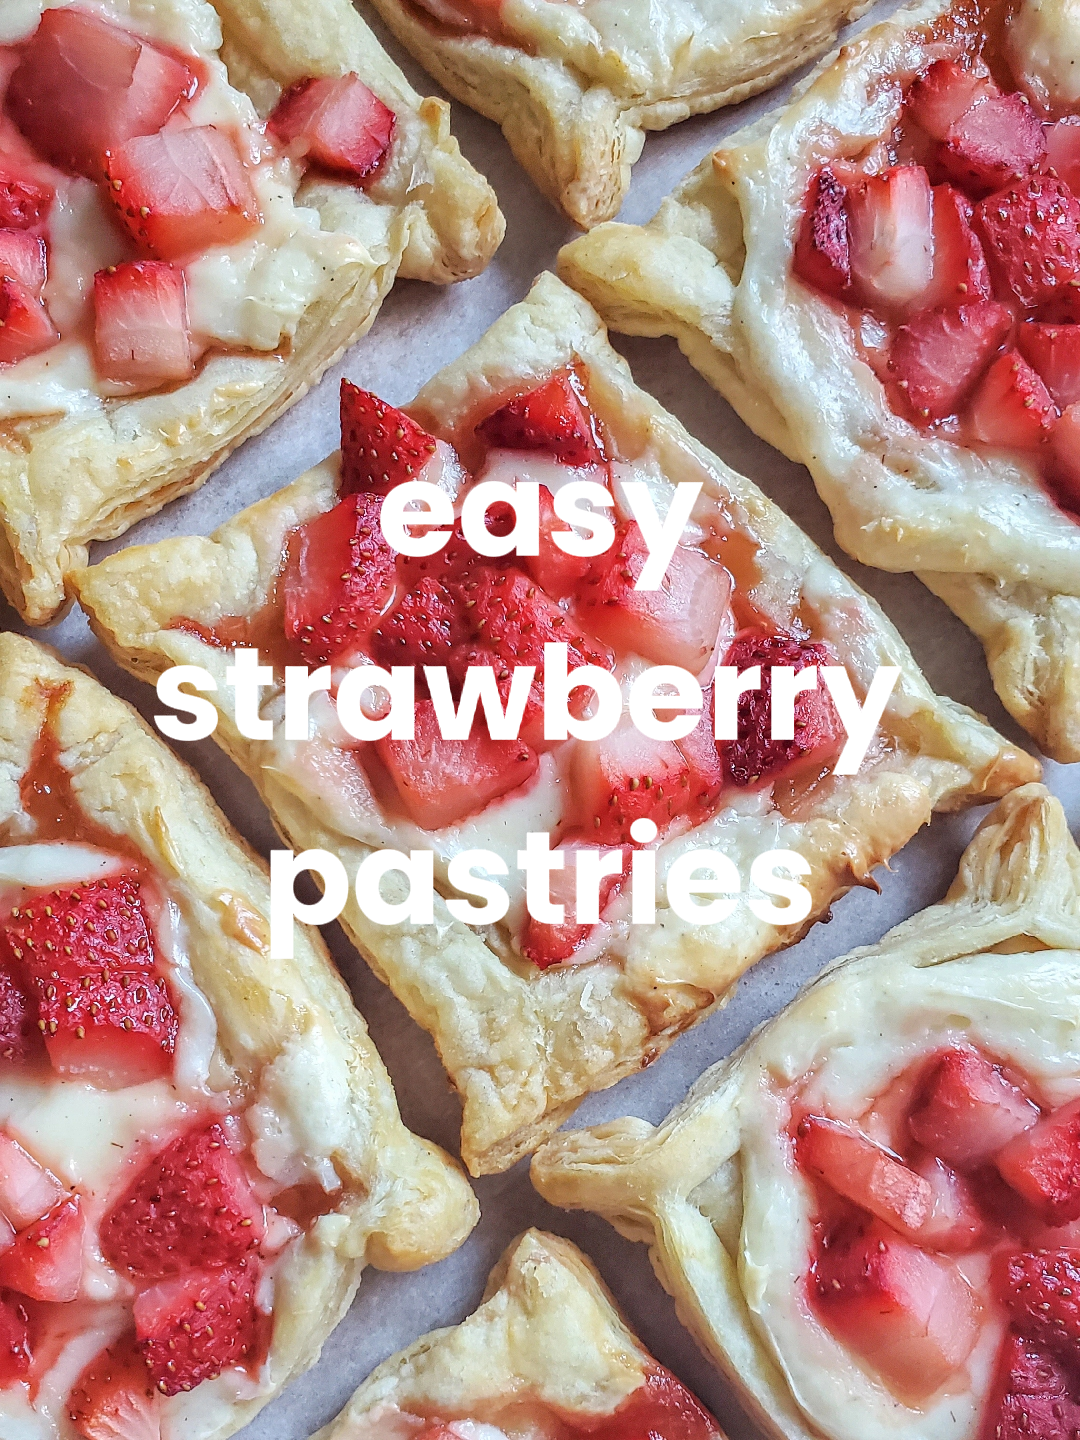 try these easy strawberry pastries! 🍓's images